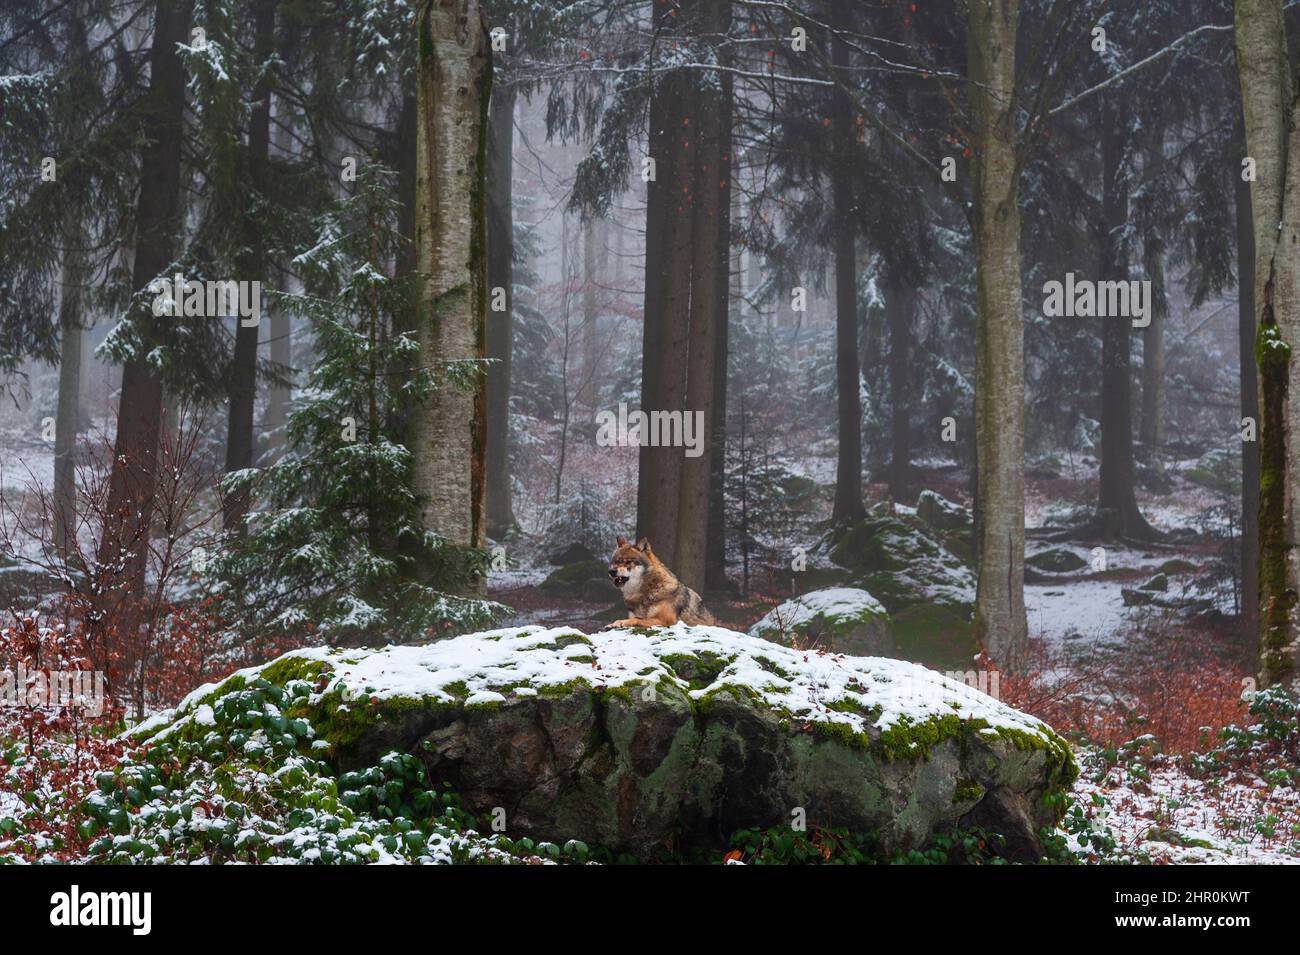 A gray wolf, Canis lupus, resting on a snow-covered mossy boulder in a foggy forest. Bayerischer Wald National Park, Bavaria, Germany. Stock Photo